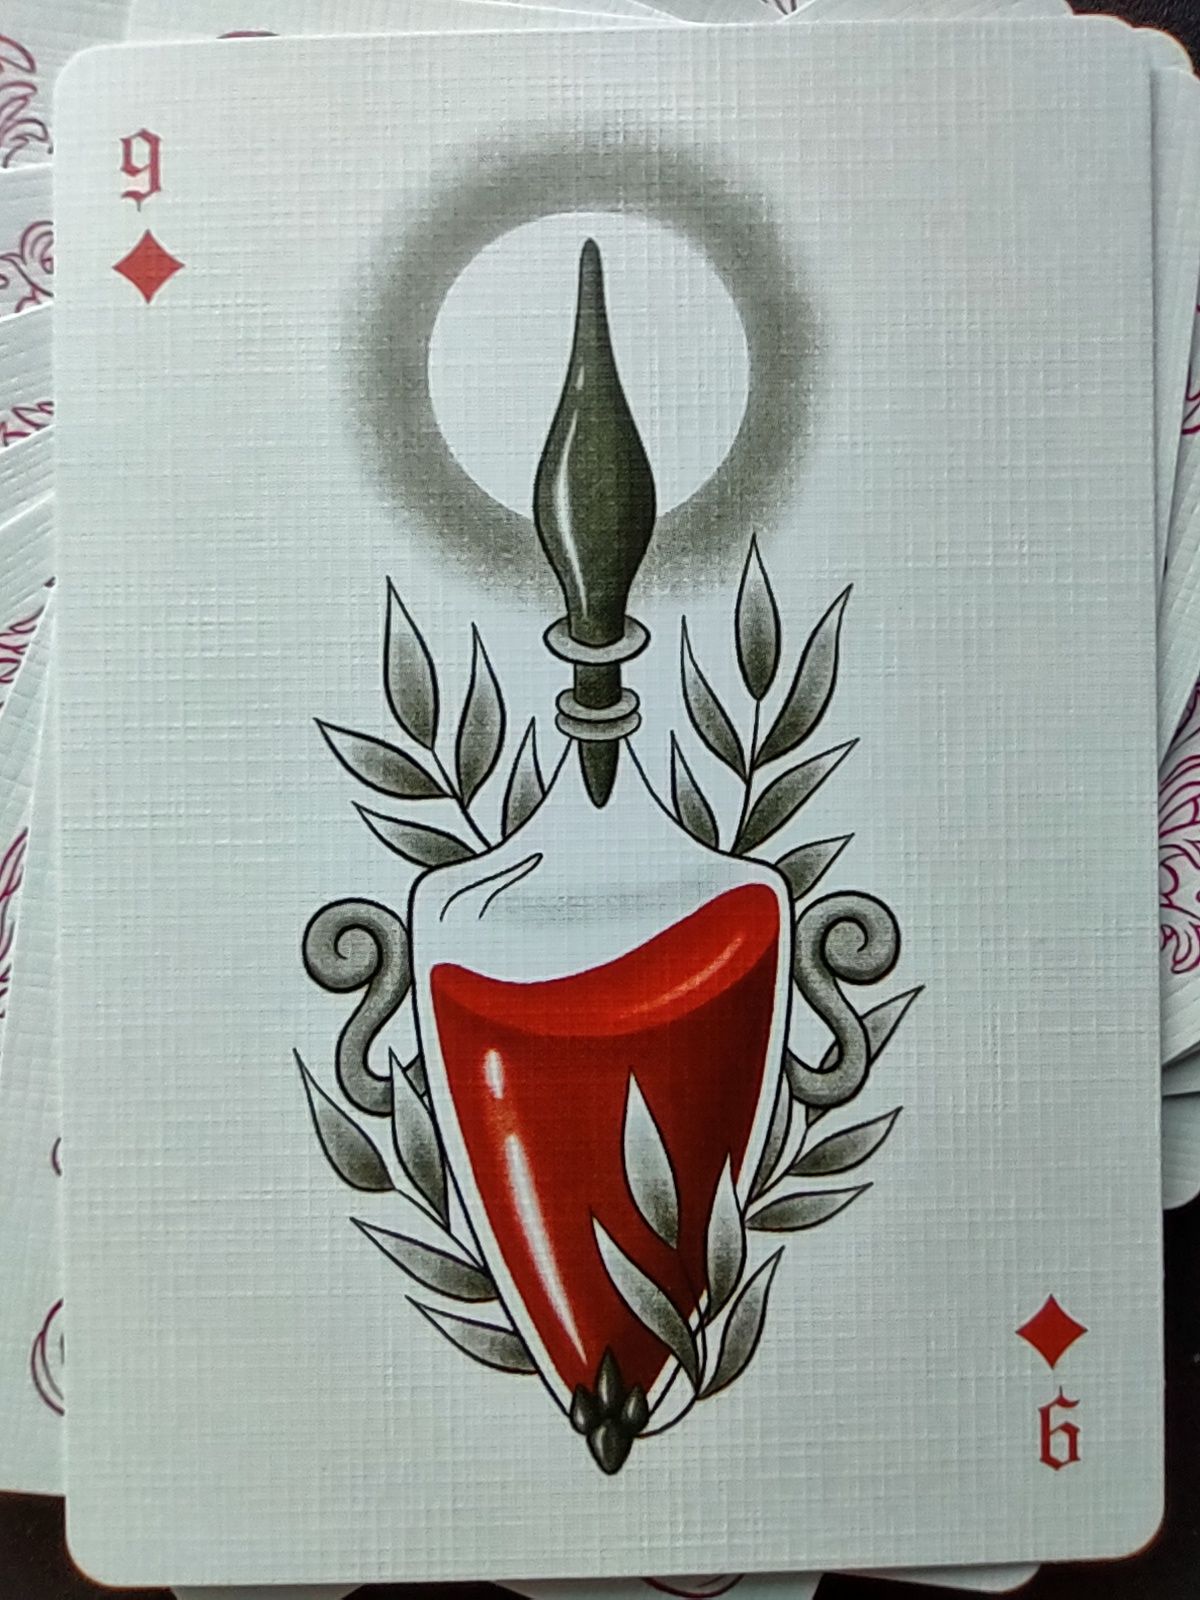 9 of diamonds. From the Bloom deck by Laura Marcuet.